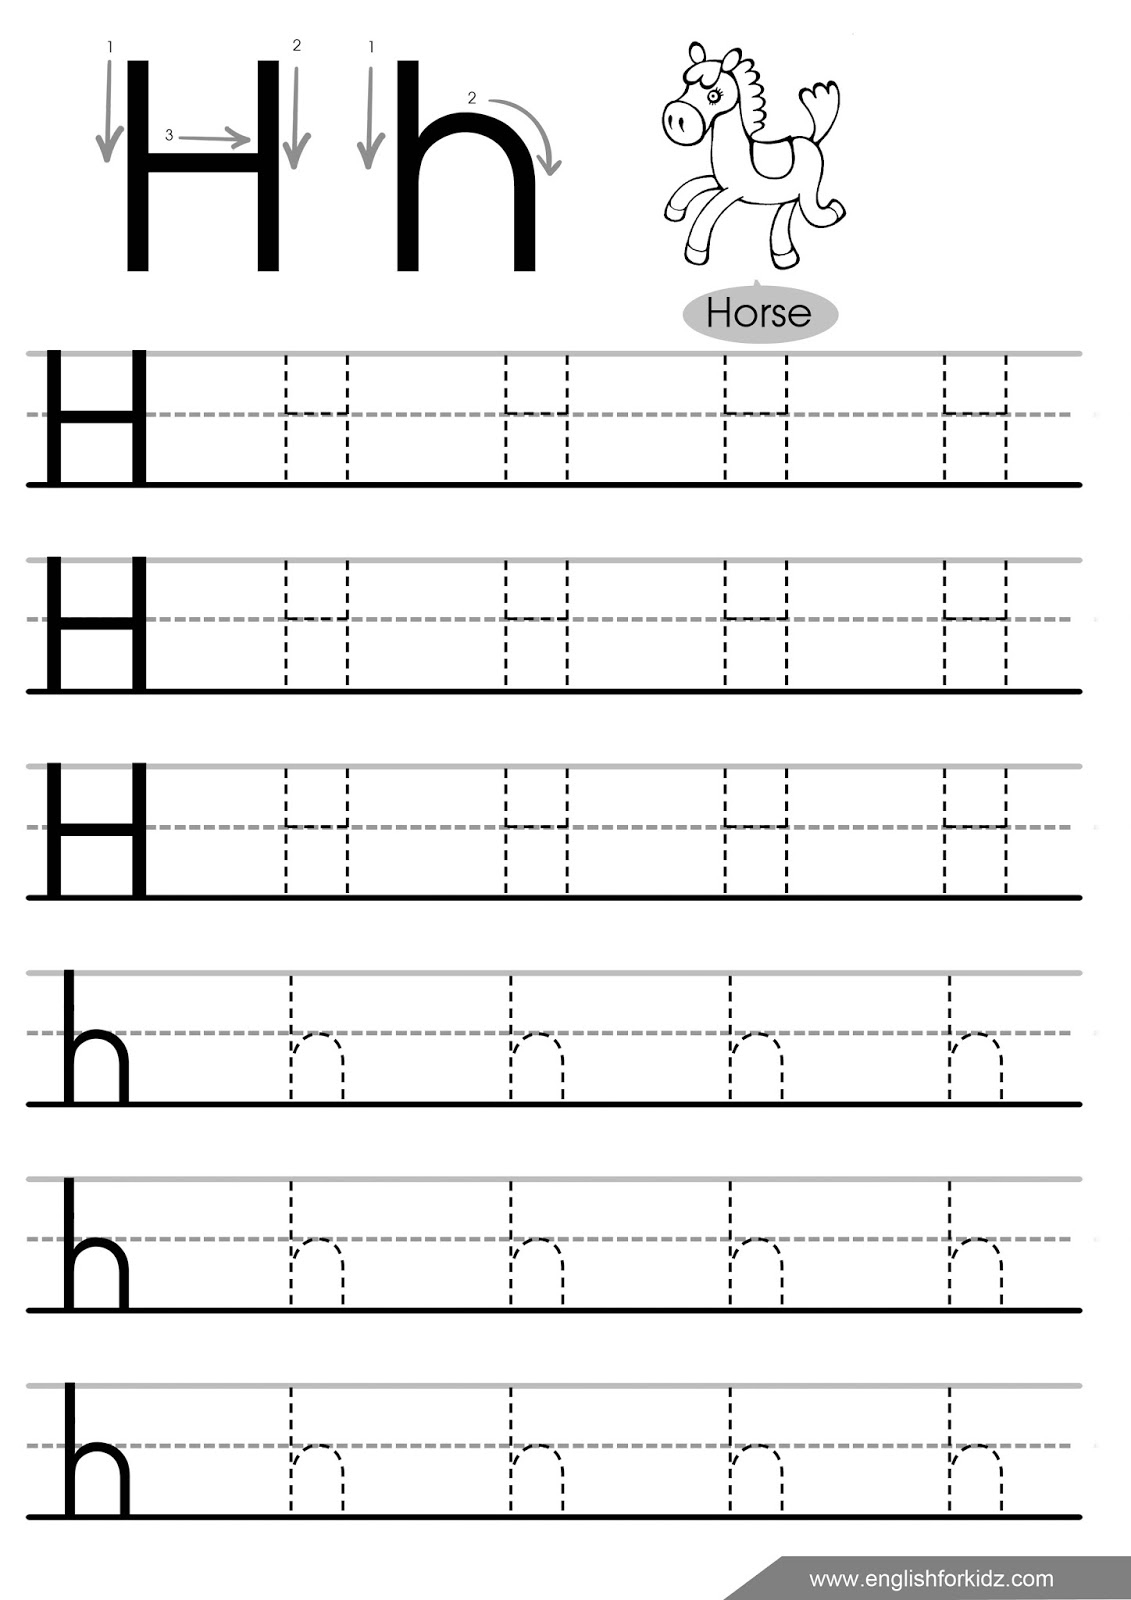 Letter H Tracing Page AlphabetWorksheetsFree com